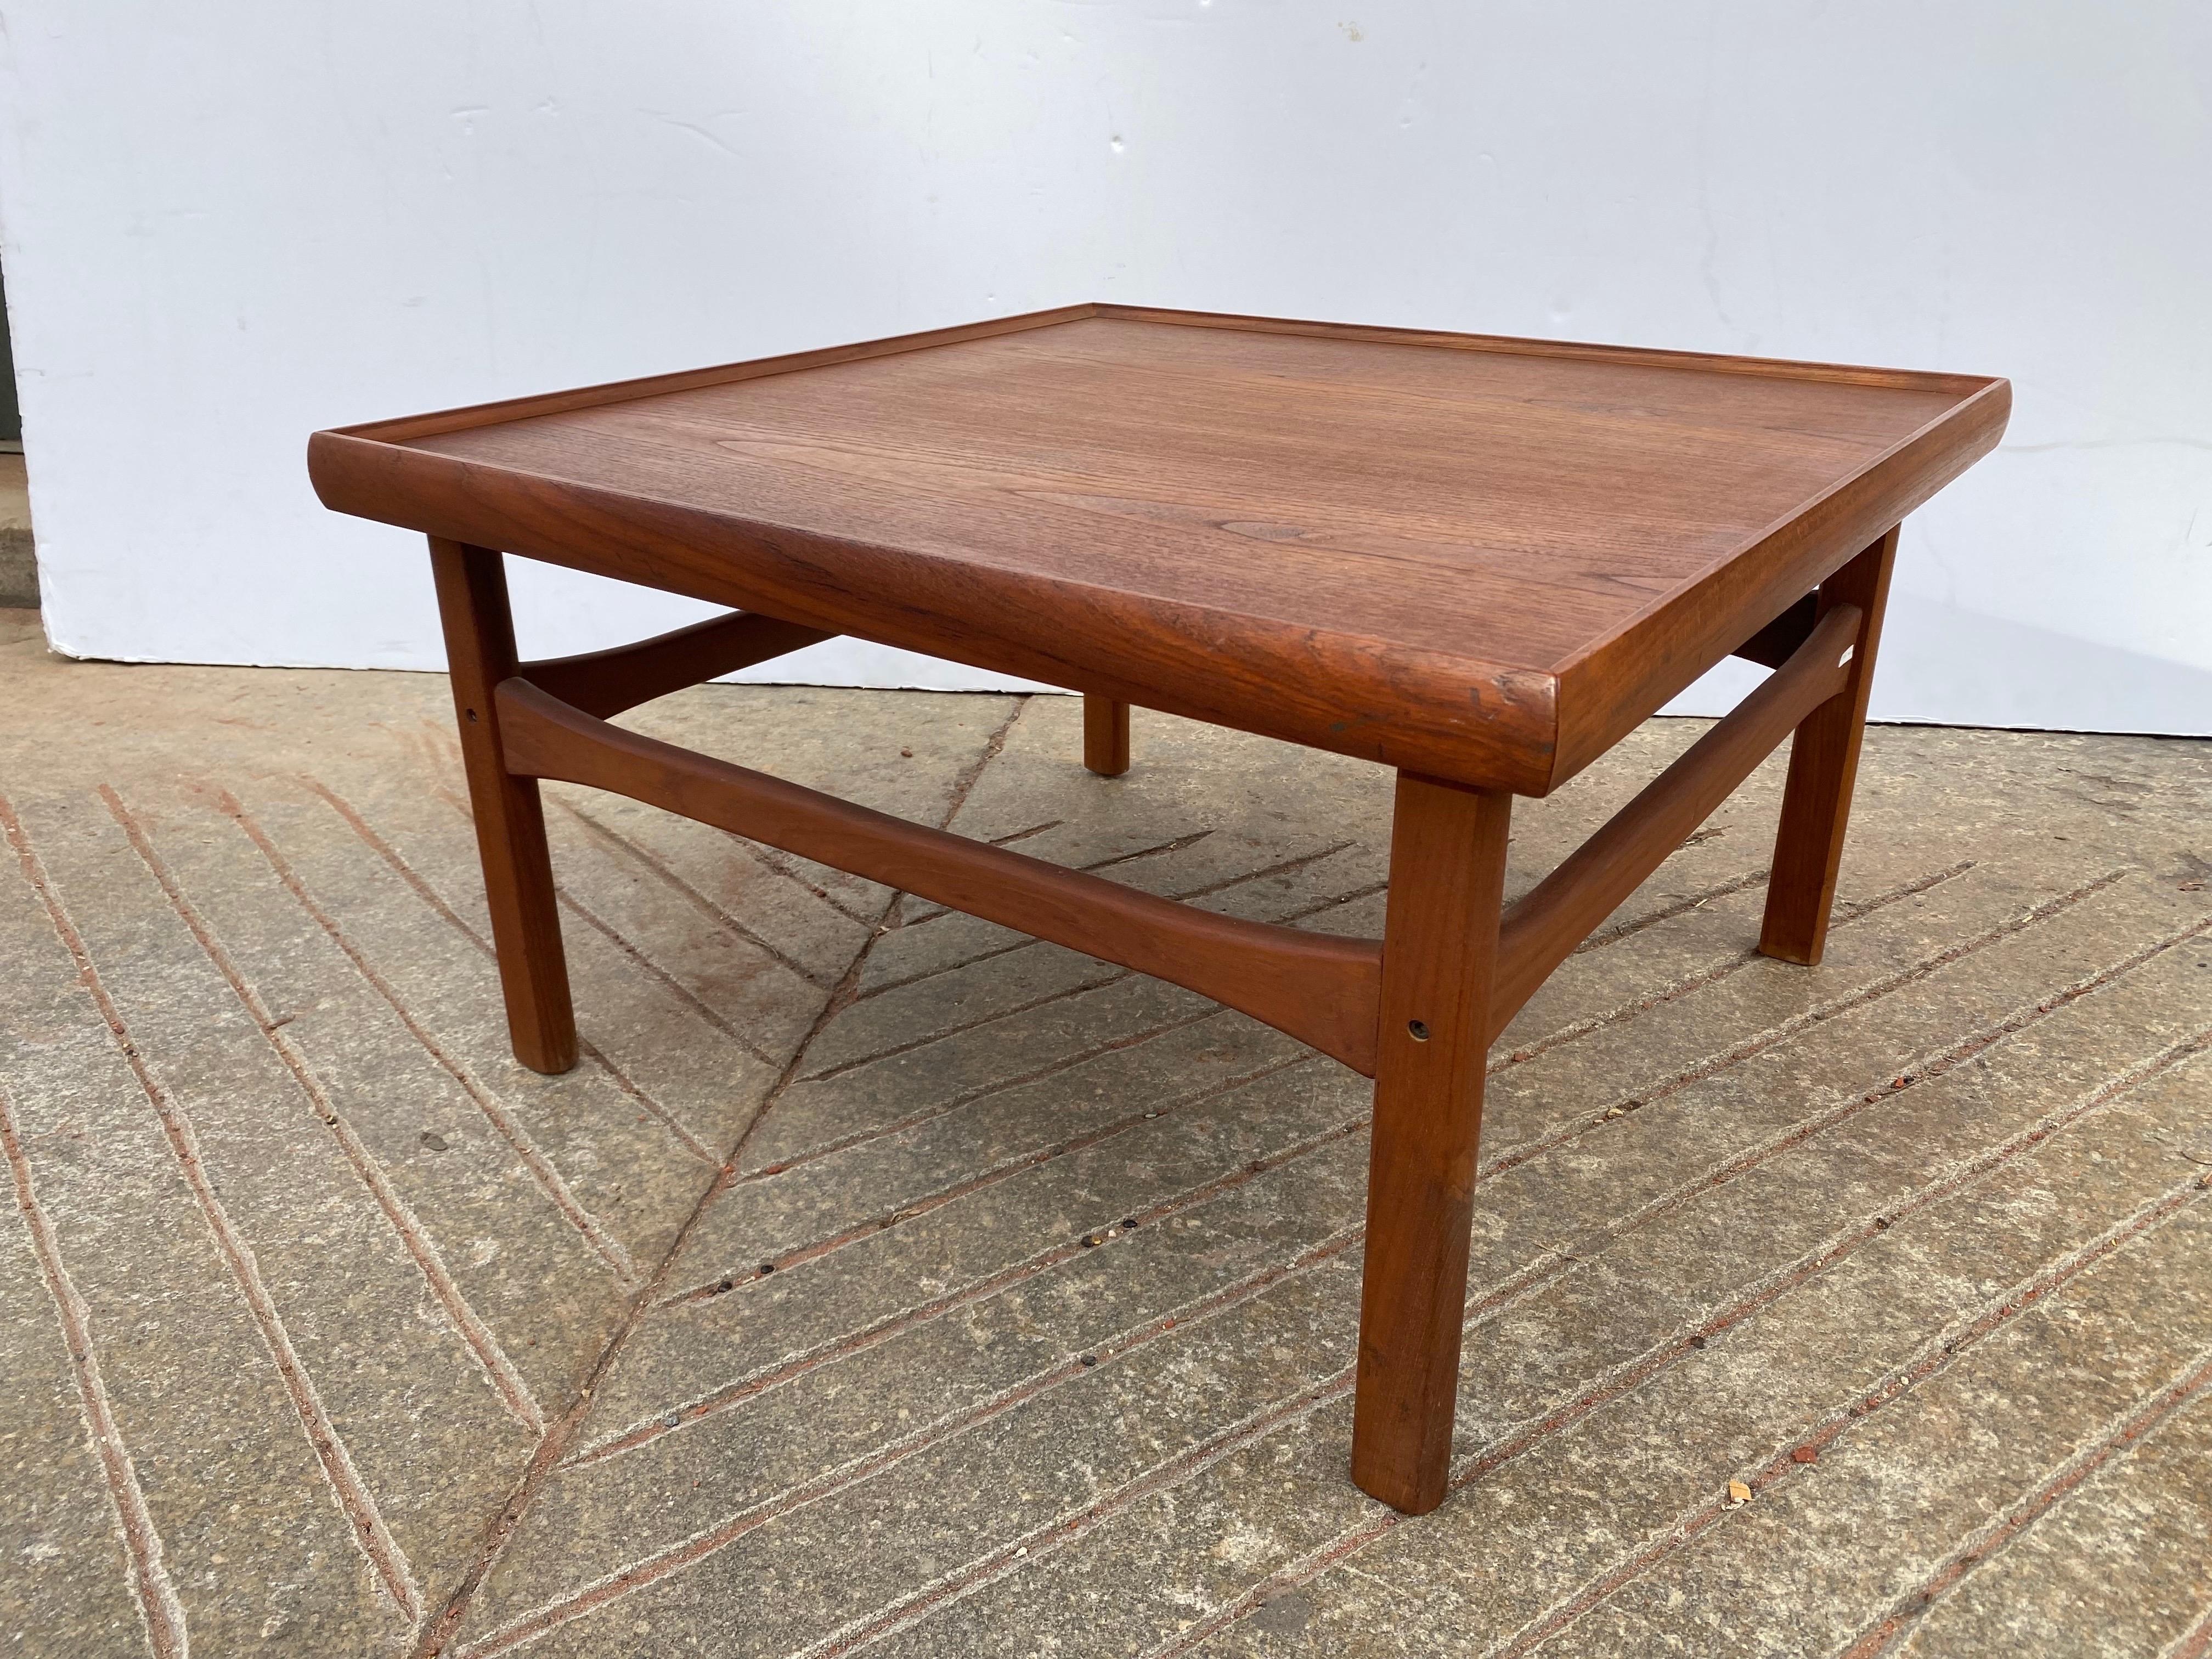 Square Teak Coffee Table in very nice original condition.  Bought from a moreddi Sales Rep with several other pieces from this company, guessing this might be from them as well.  nice Size and Scale.  Rolled lip all around perfect to catch items